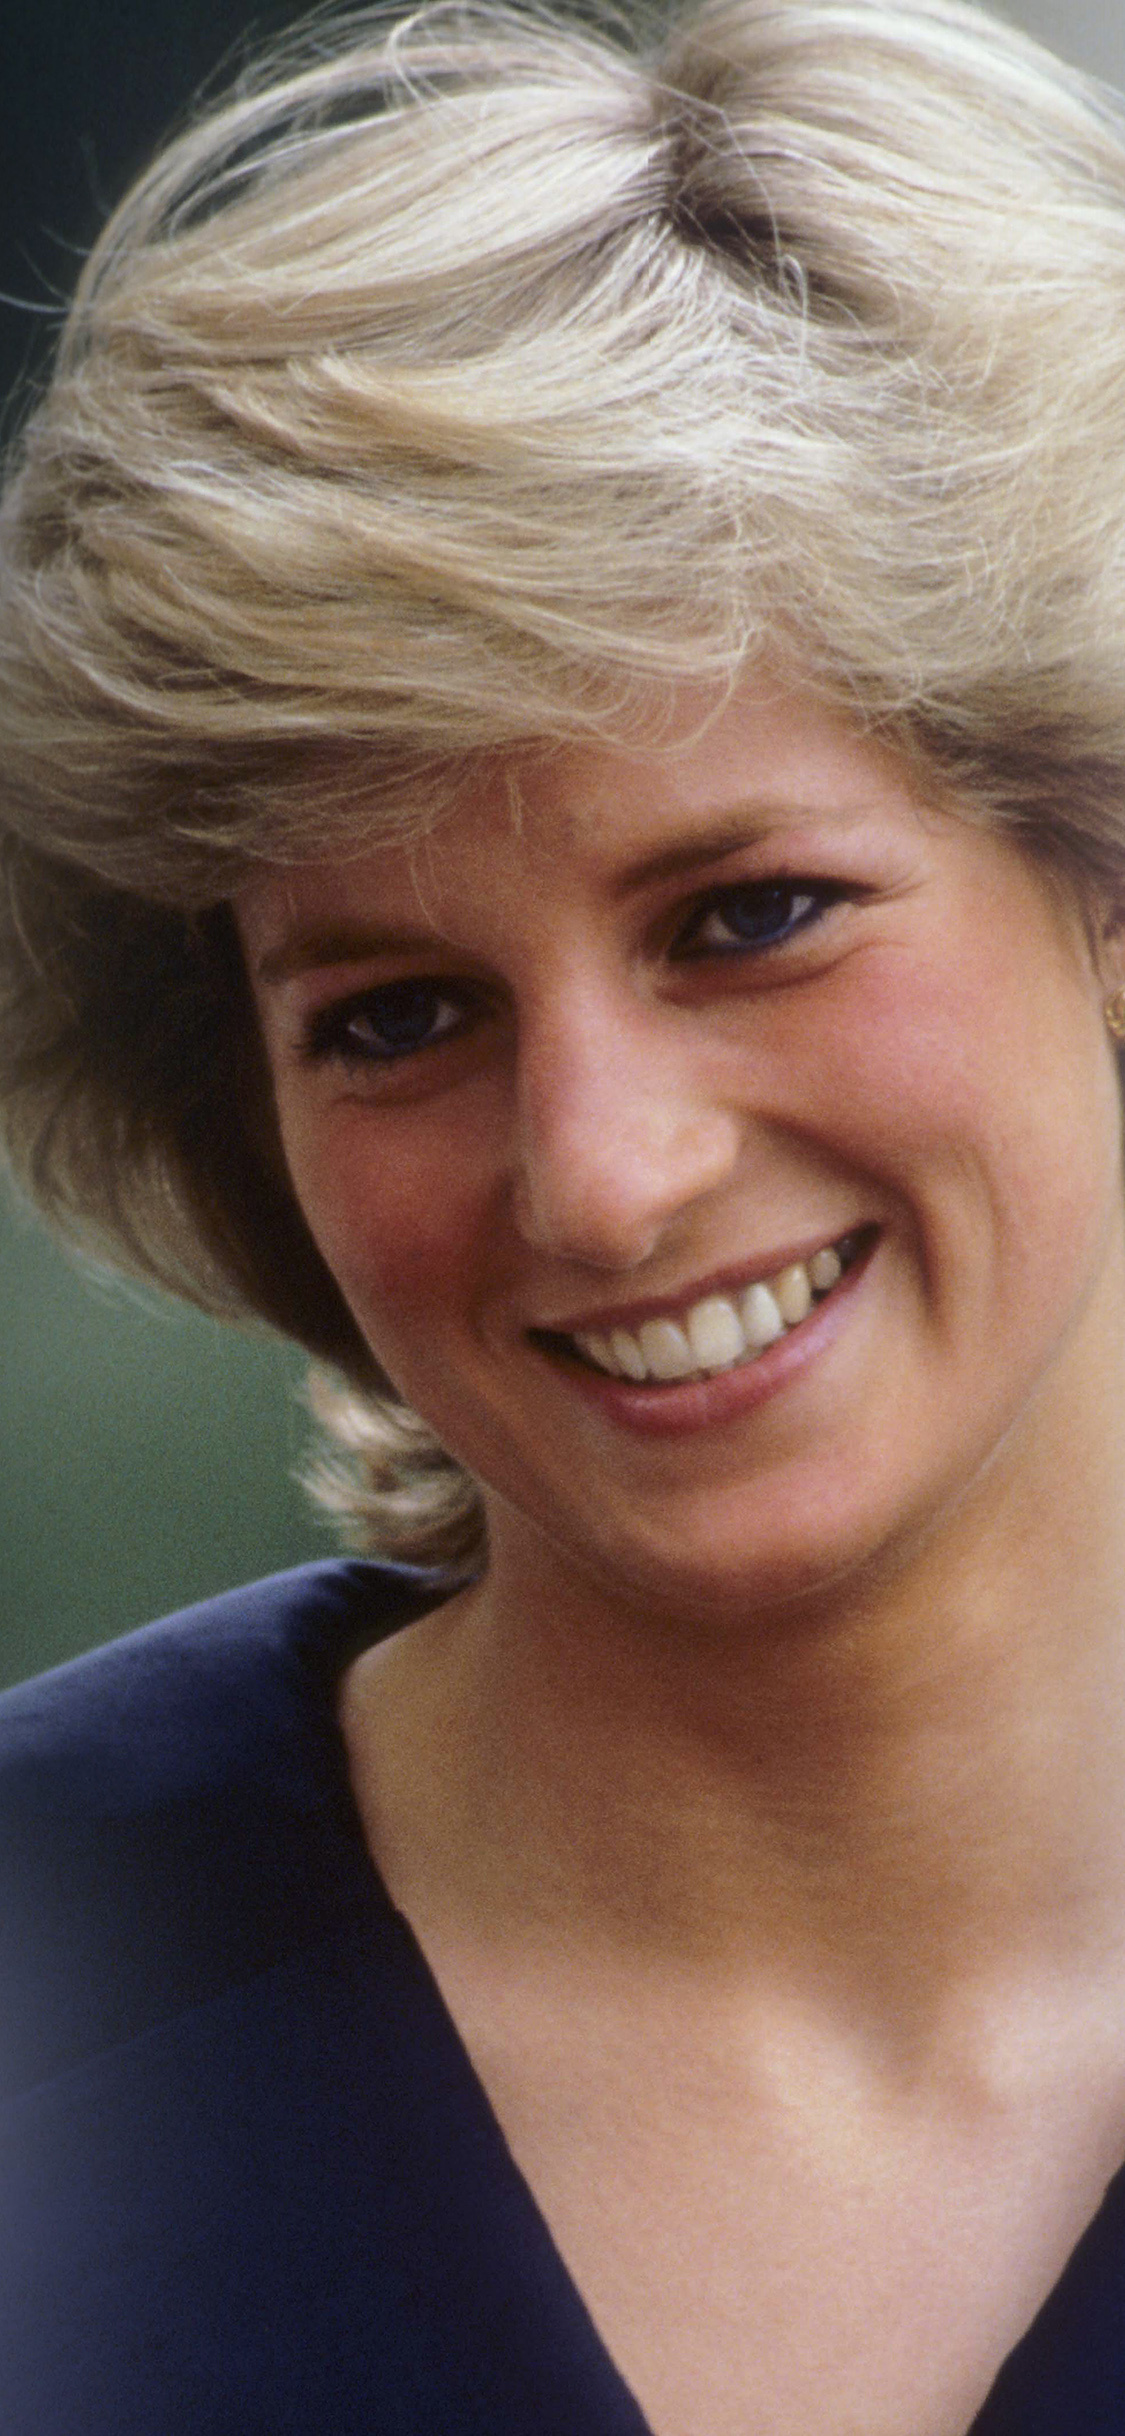 Princess Diana: First met the Prince of Wales, Elizabeth II's eldest son and heir apparent, when she was 16 in November 1977. 1130x2440 HD Background.